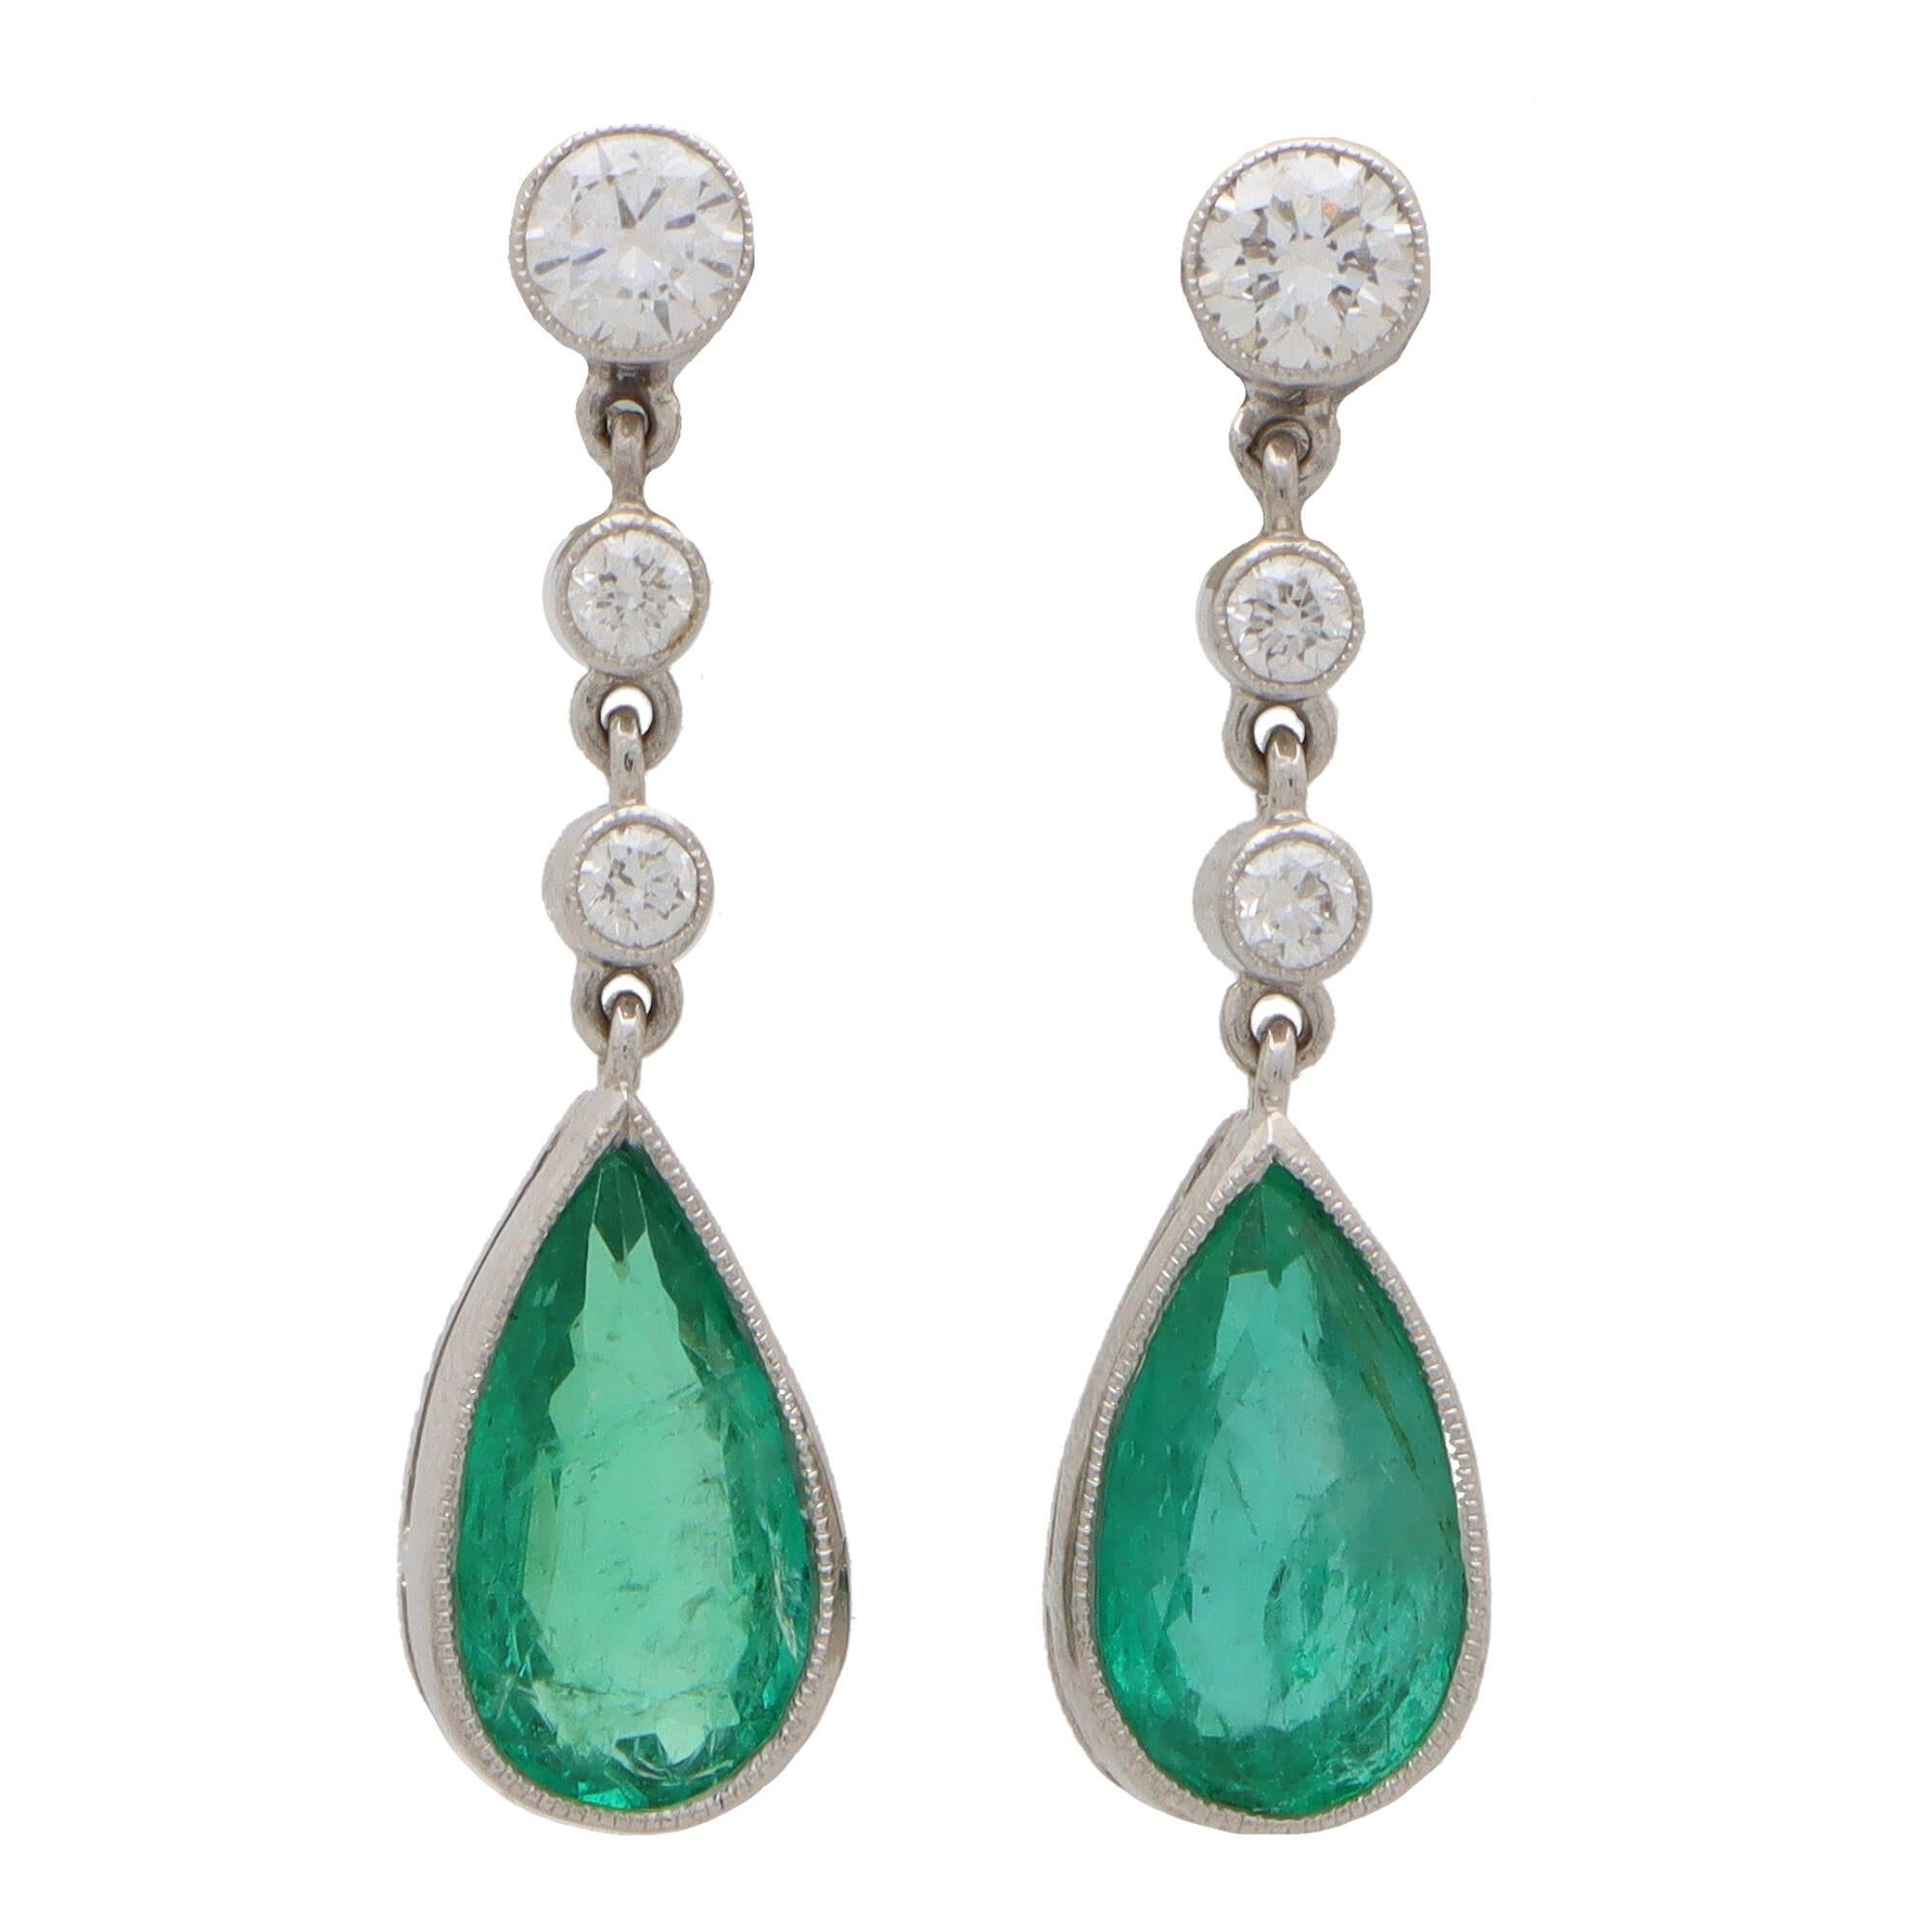 Women's or Men's Contemporary Pear Cut Emerald and Diamond Drop Earrings Set in 18k White Gold